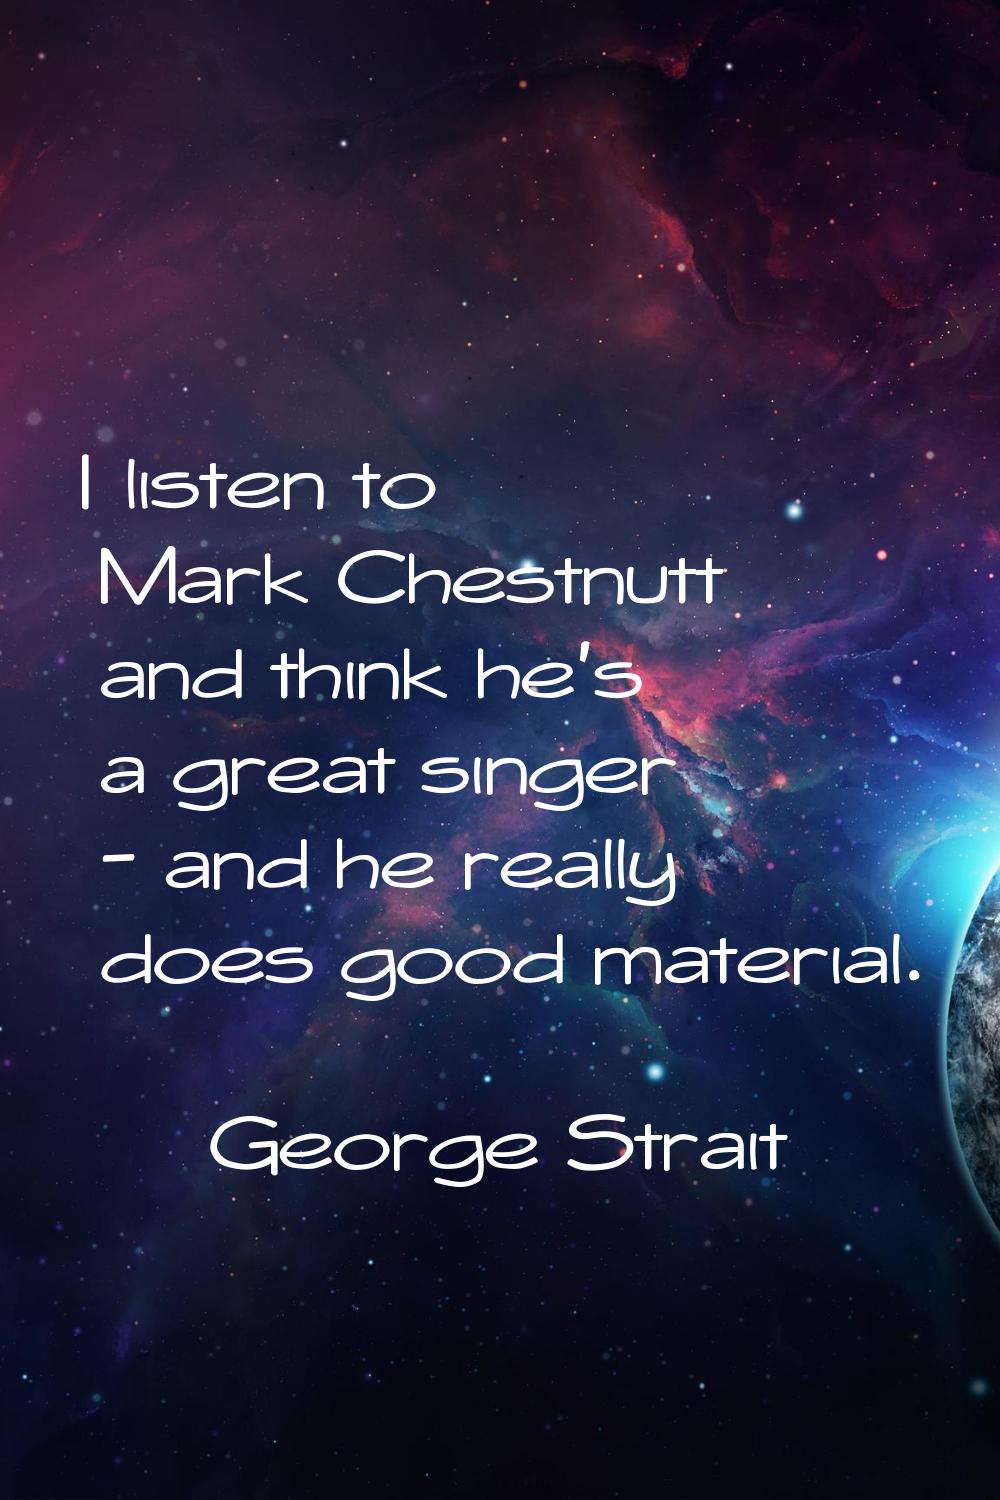 I listen to Mark Chestnutt and think he's a great singer - and he really does good material.